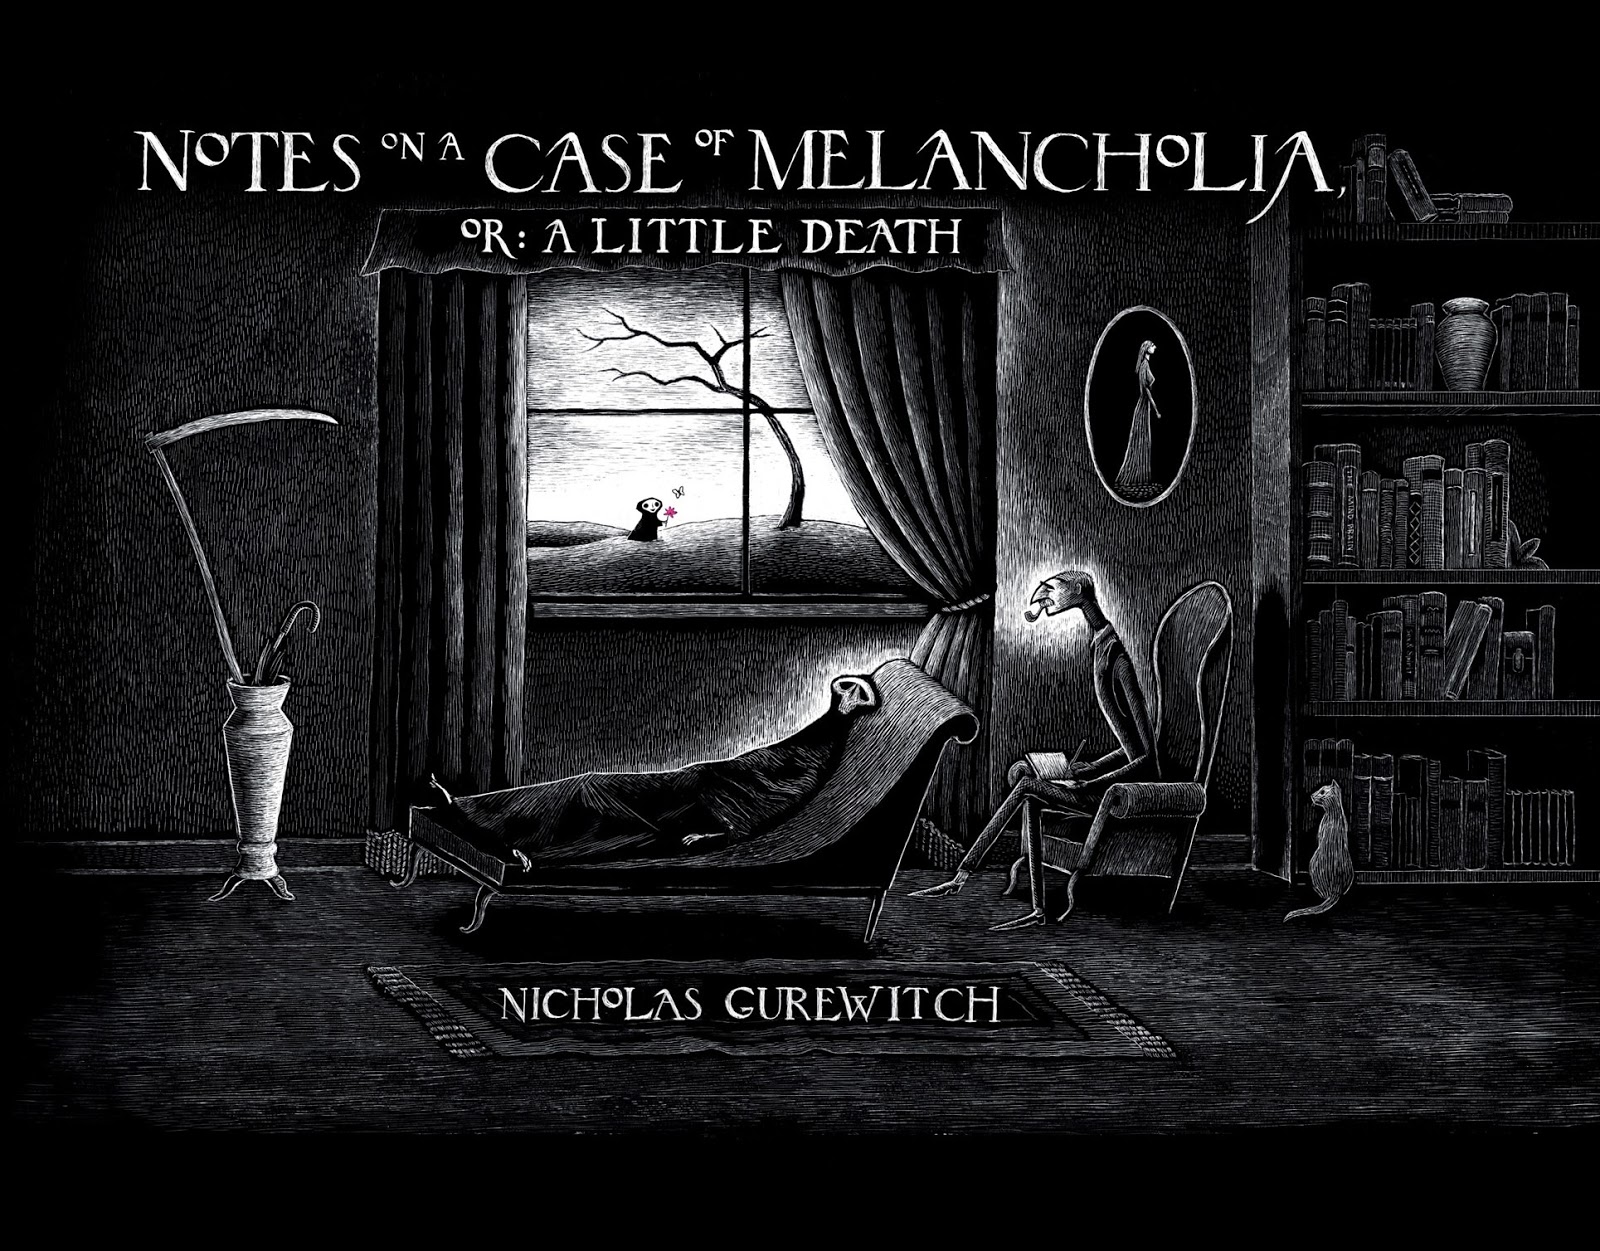 Notes on a Case of Melancholia, or A Little Death